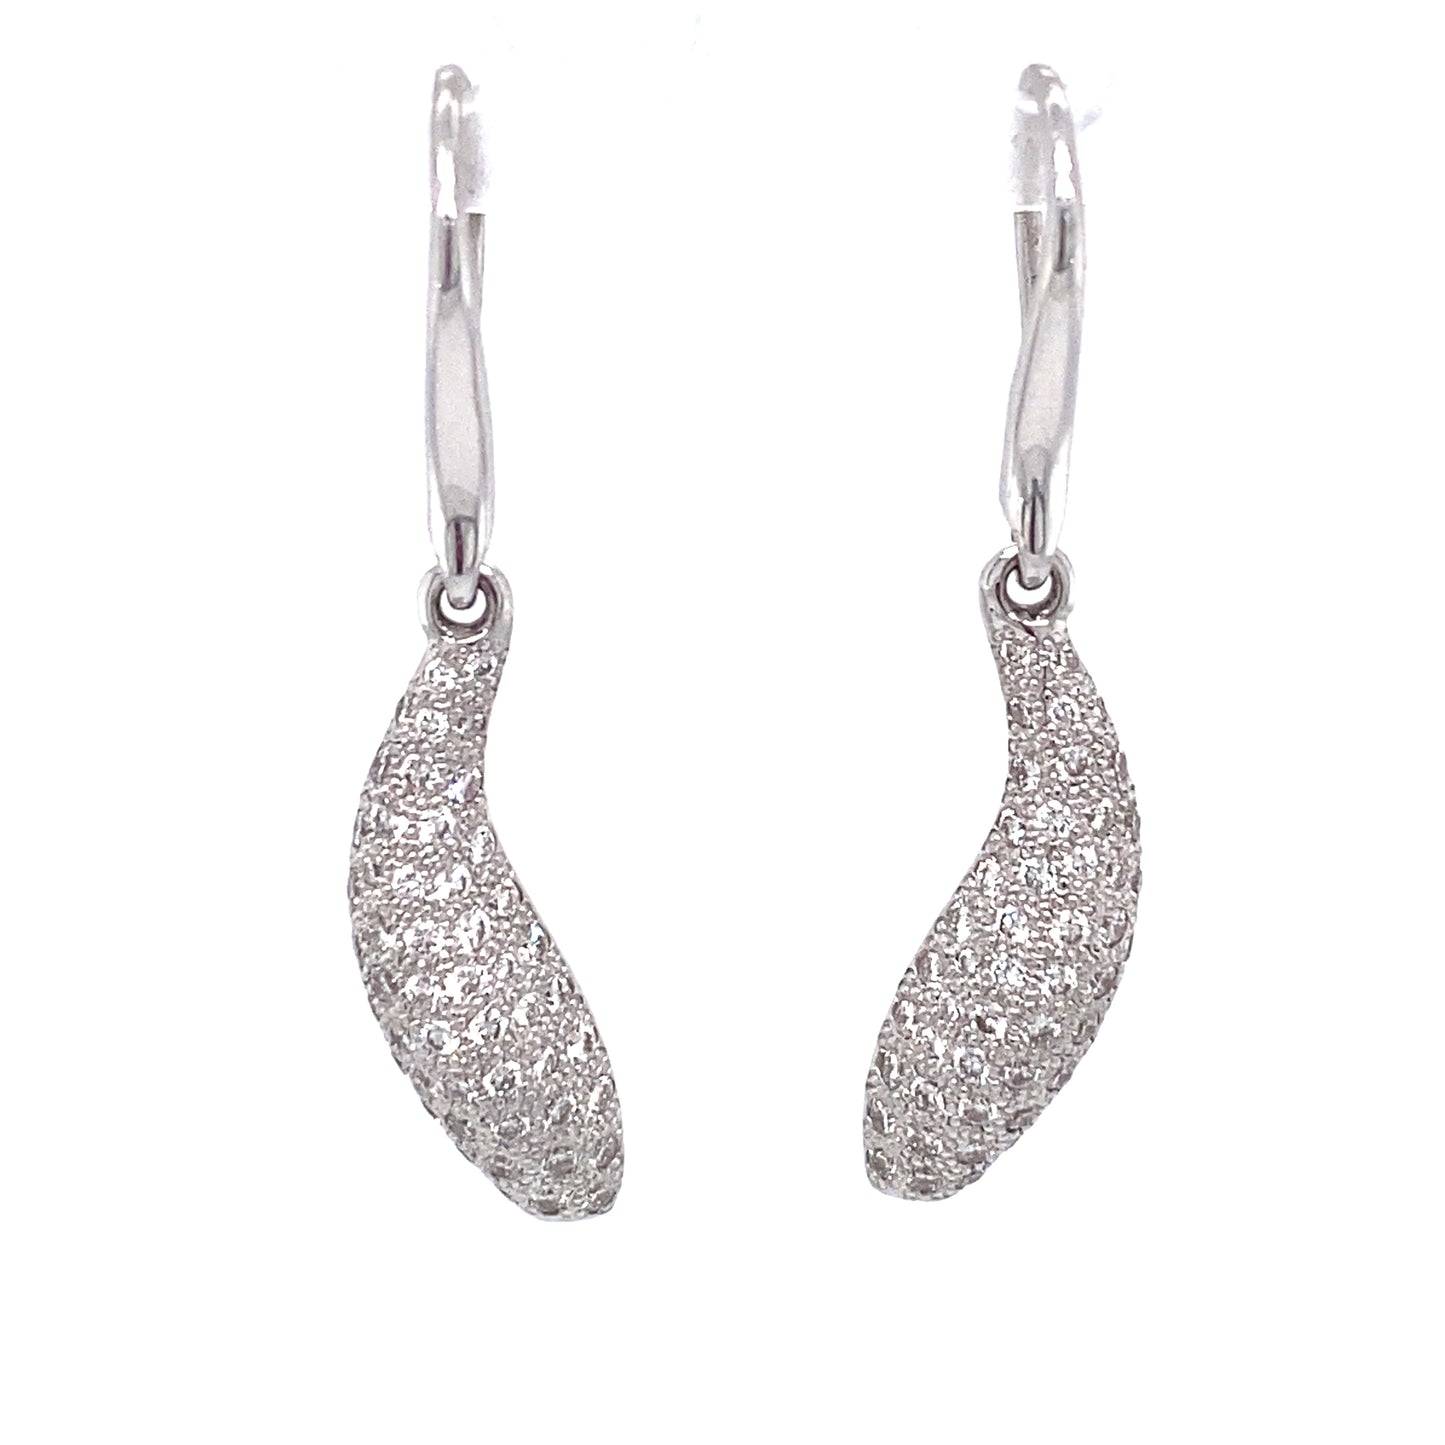 Tiffany & Co Frank Gehry Pavé Diamond Fish Earrings in 18K White Gold